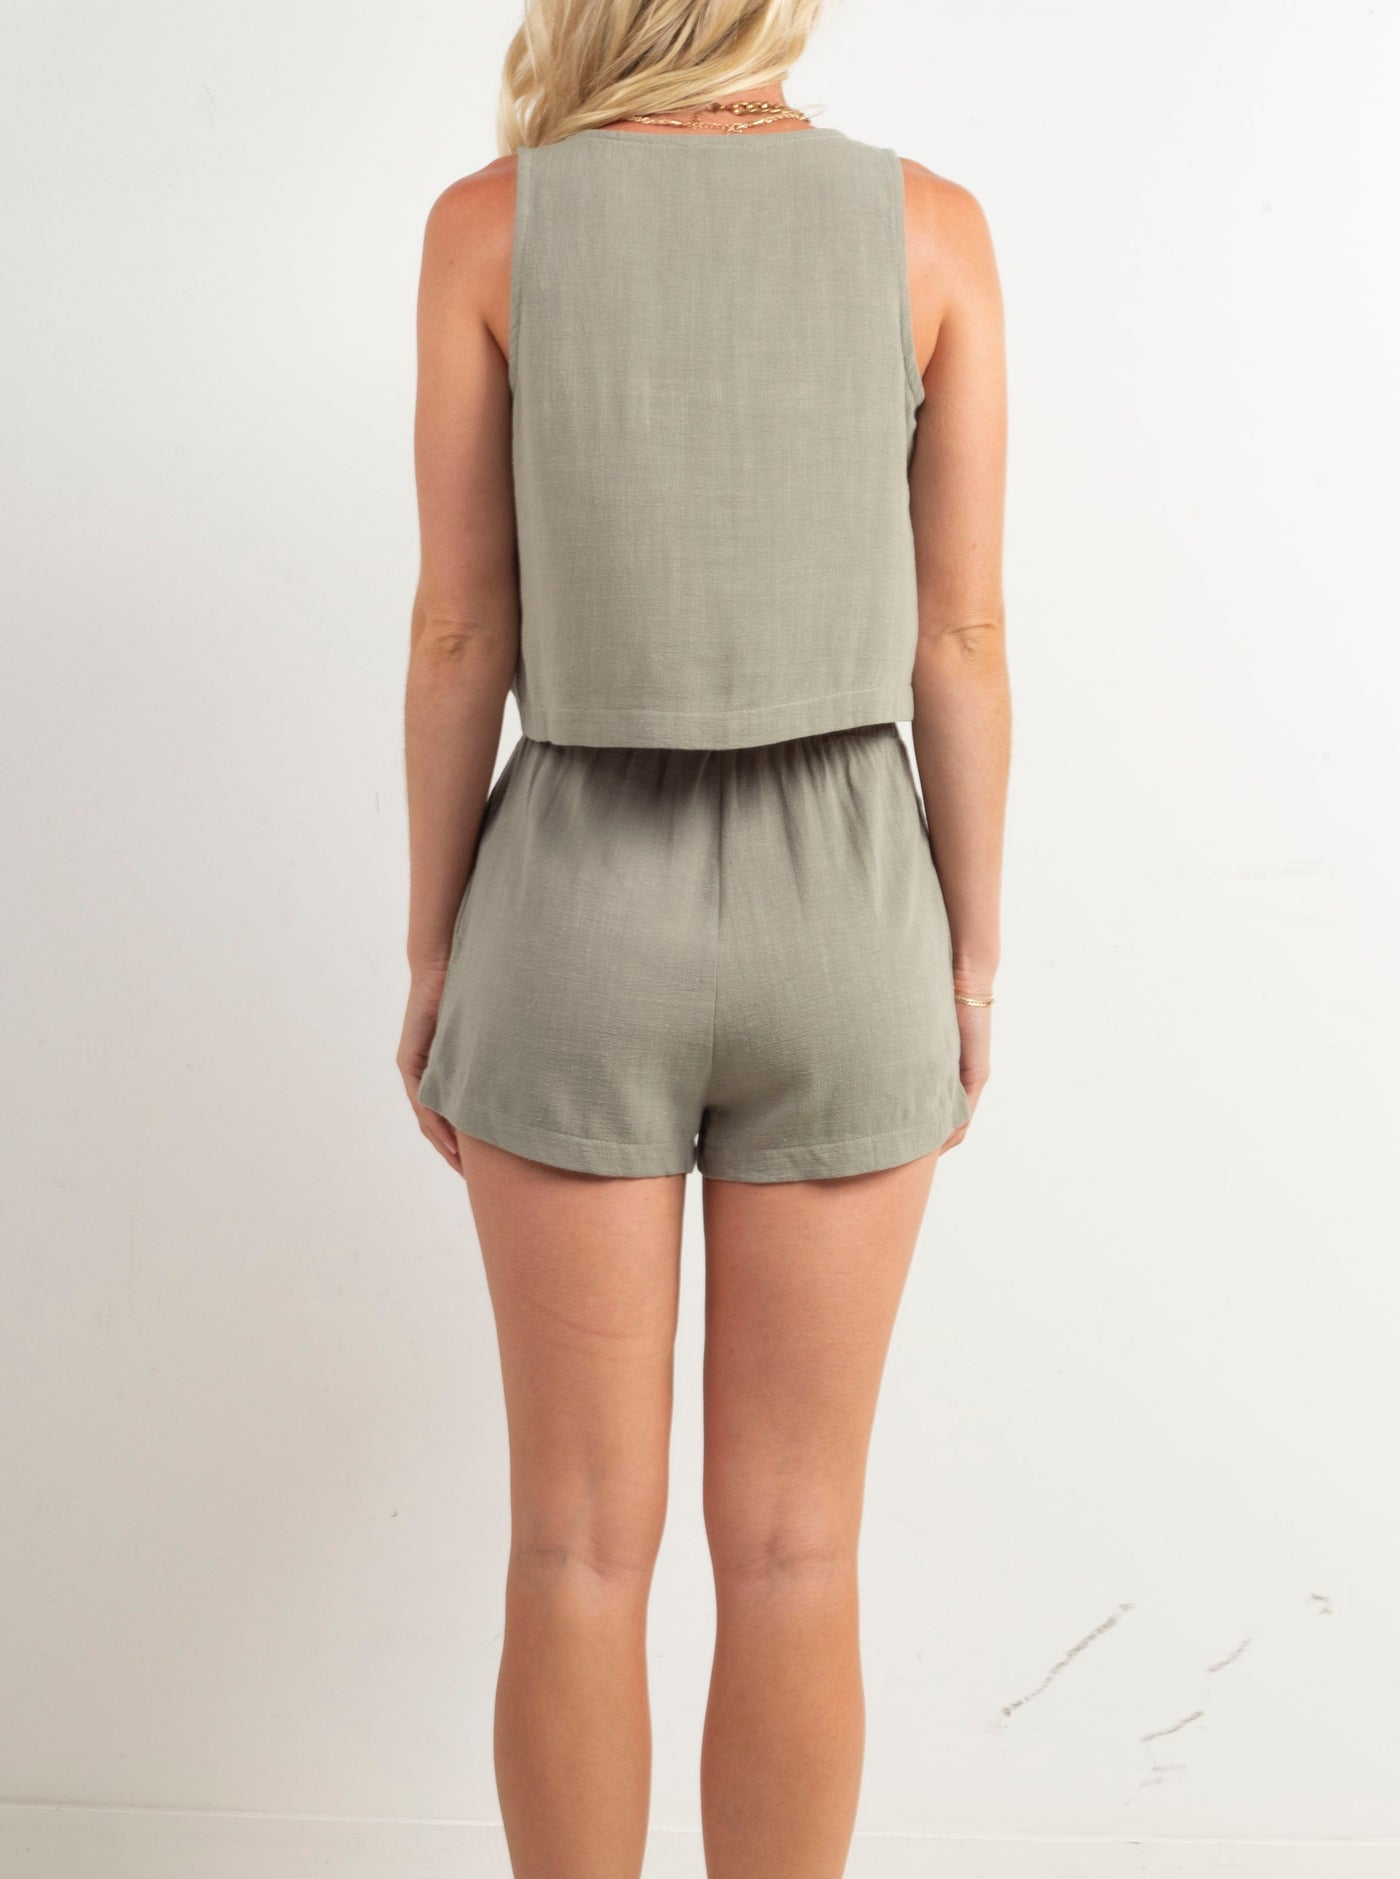 NTG Fad SUIT Mika Sleeveless Button Down Short - Celery